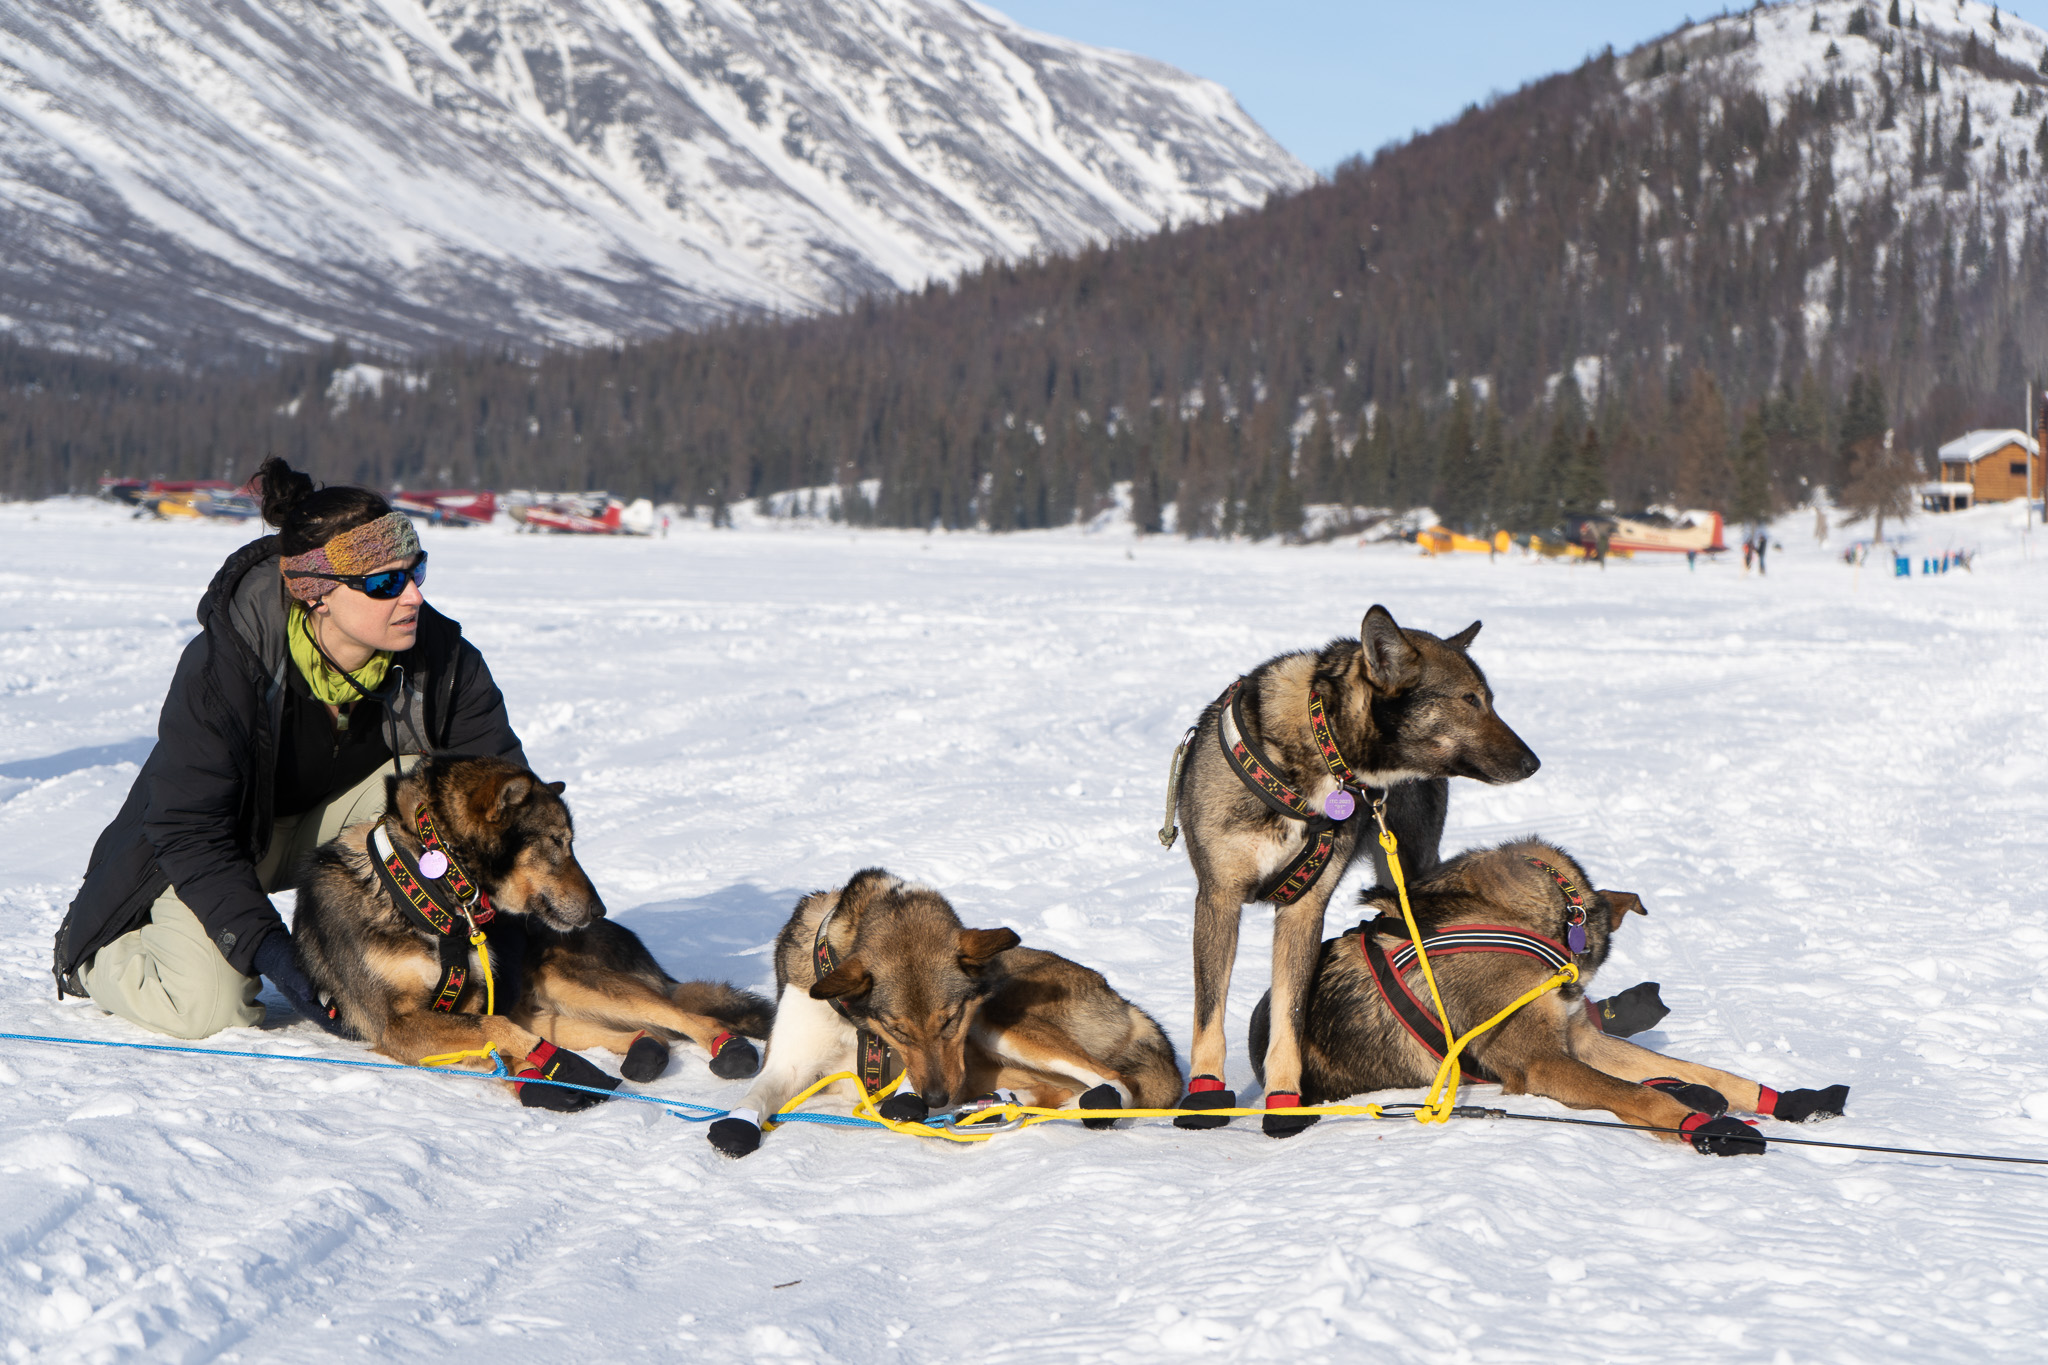 A veterinarian checks dogs tied up and in harnesses awith mountains in the background